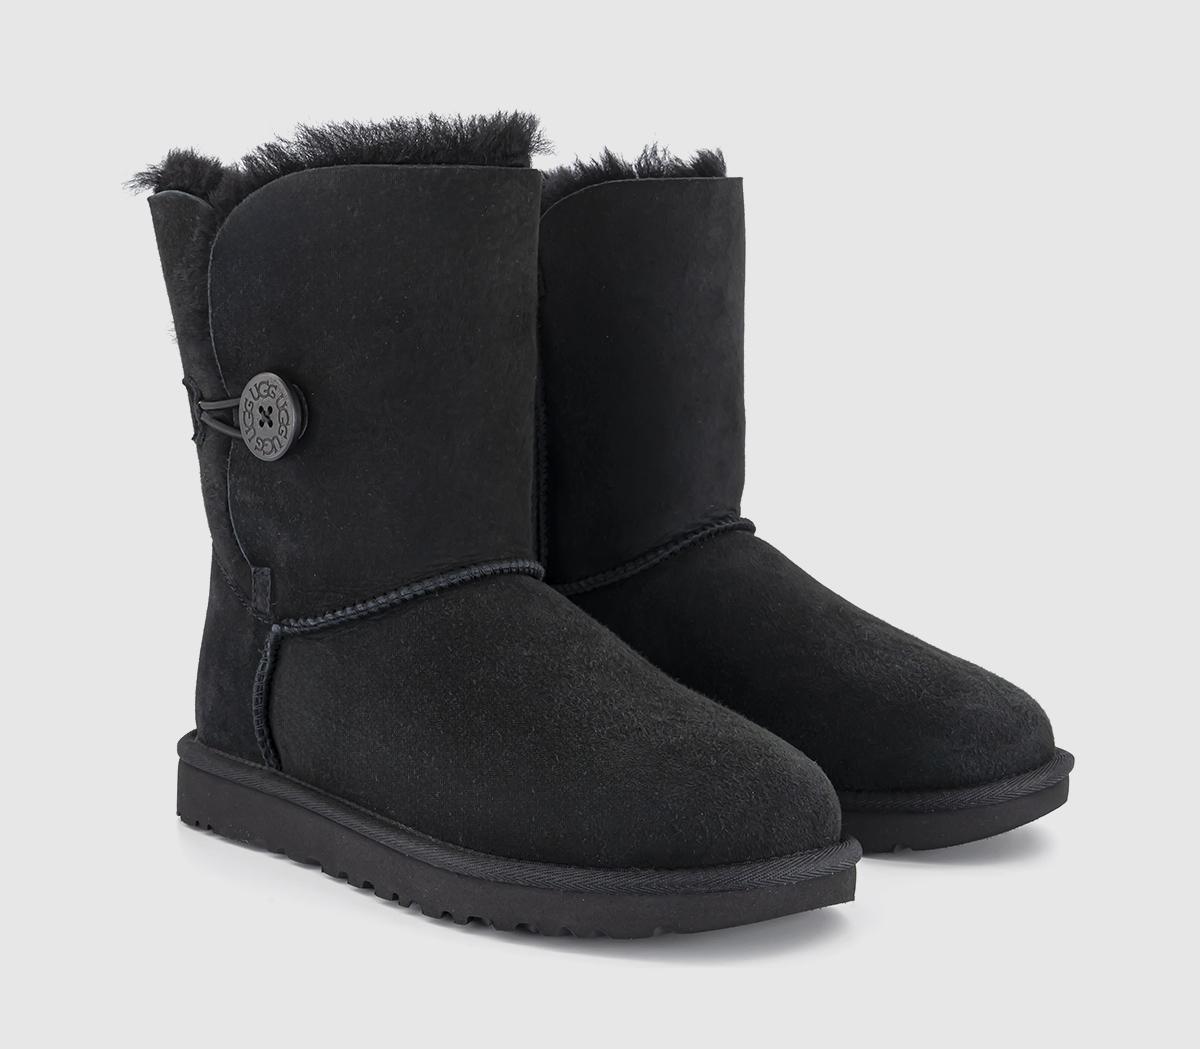 UGG Womens Black Suede Bailey Button Ii Boots, 3